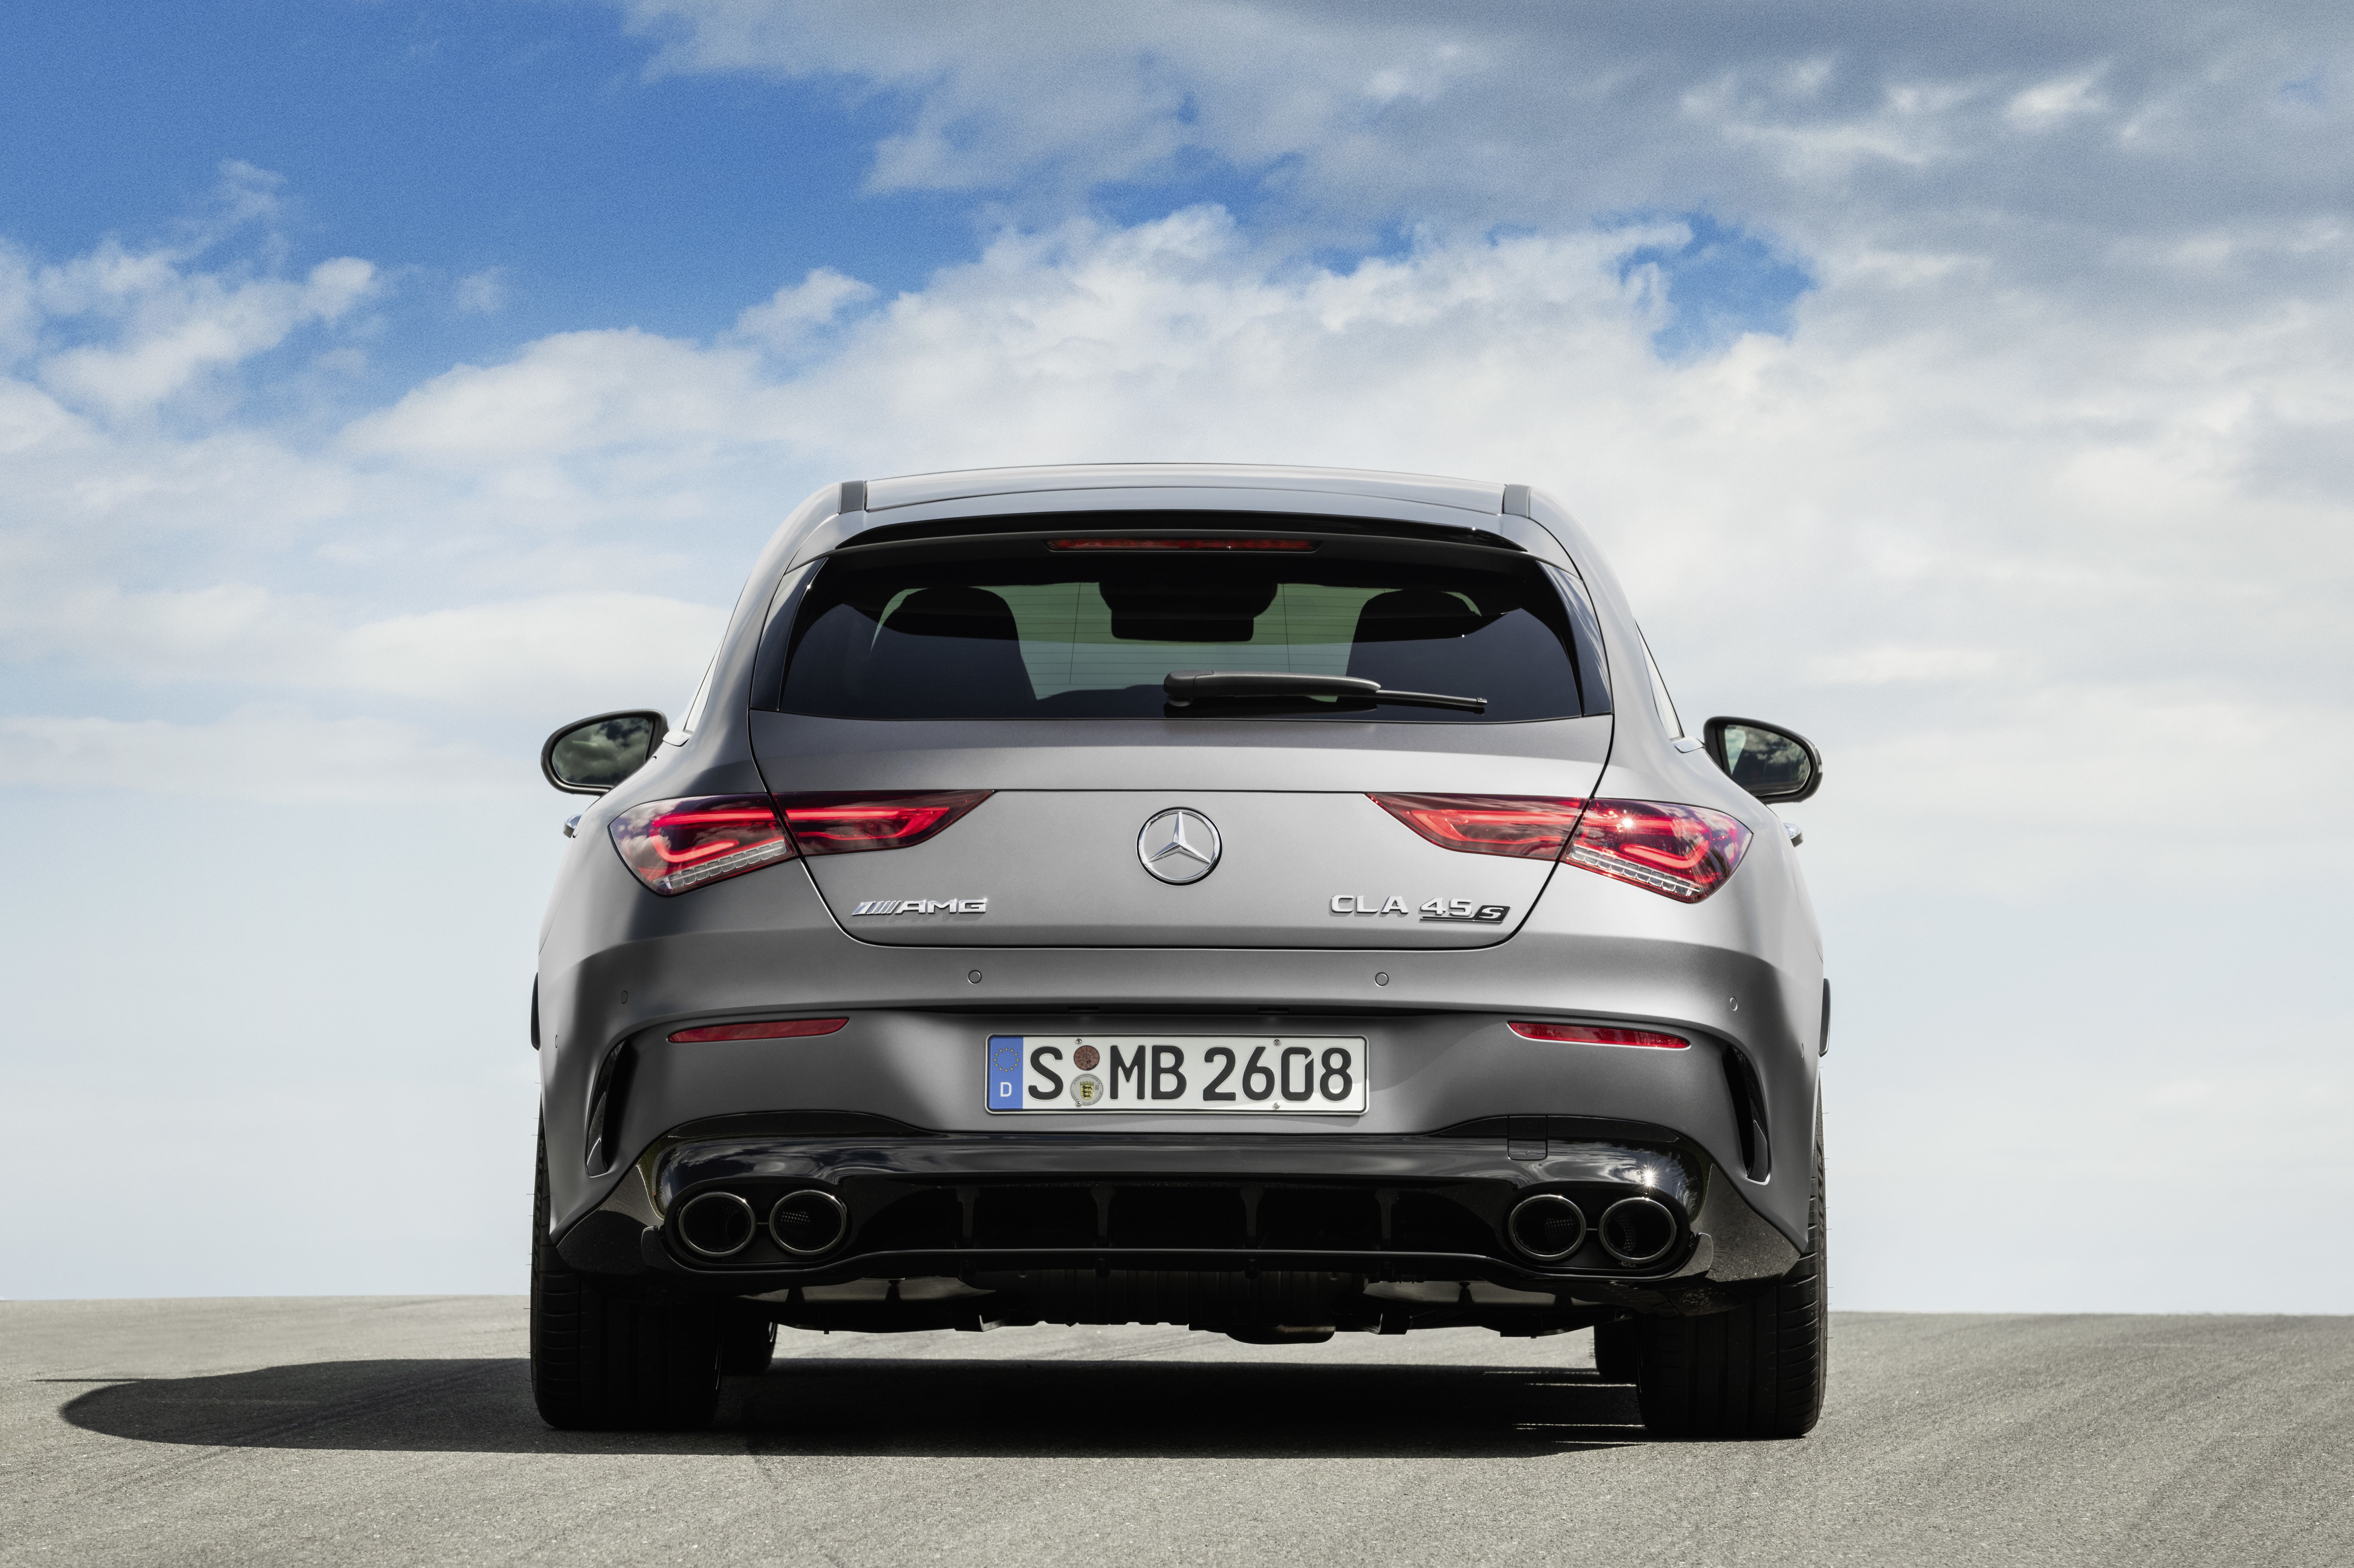 Mercedes-AMG CLA 45 S 4MATIC+ Shooting Brake (2019);Kraftstoffverbrauch kombiniert: 8,4-8,2 l/100 km; CO2-Emissionen kombiniert: 191-188 g/km*

Mercedes-AMG CLA 45 S 4MATIC+ Shooting Brake (2019);Fuel consumption combined: 8.4-8.2 l/100 km; Combined CO2 emissions: 191-188 g/km*